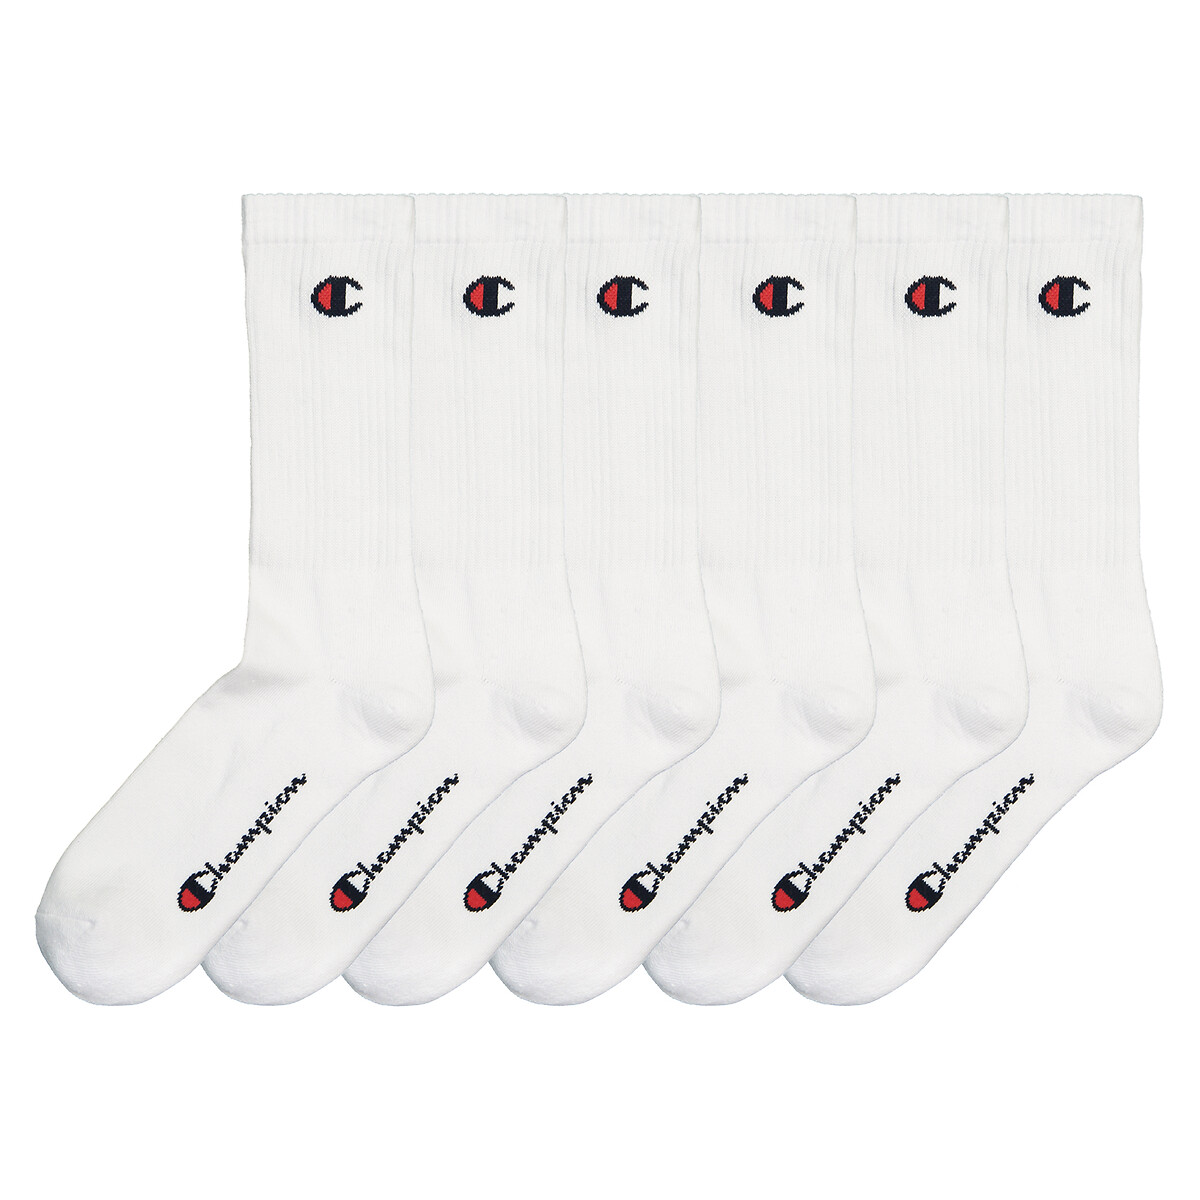 Image of Pack of 6 Pairs of Crew Socks in Cotton Mix with Logo